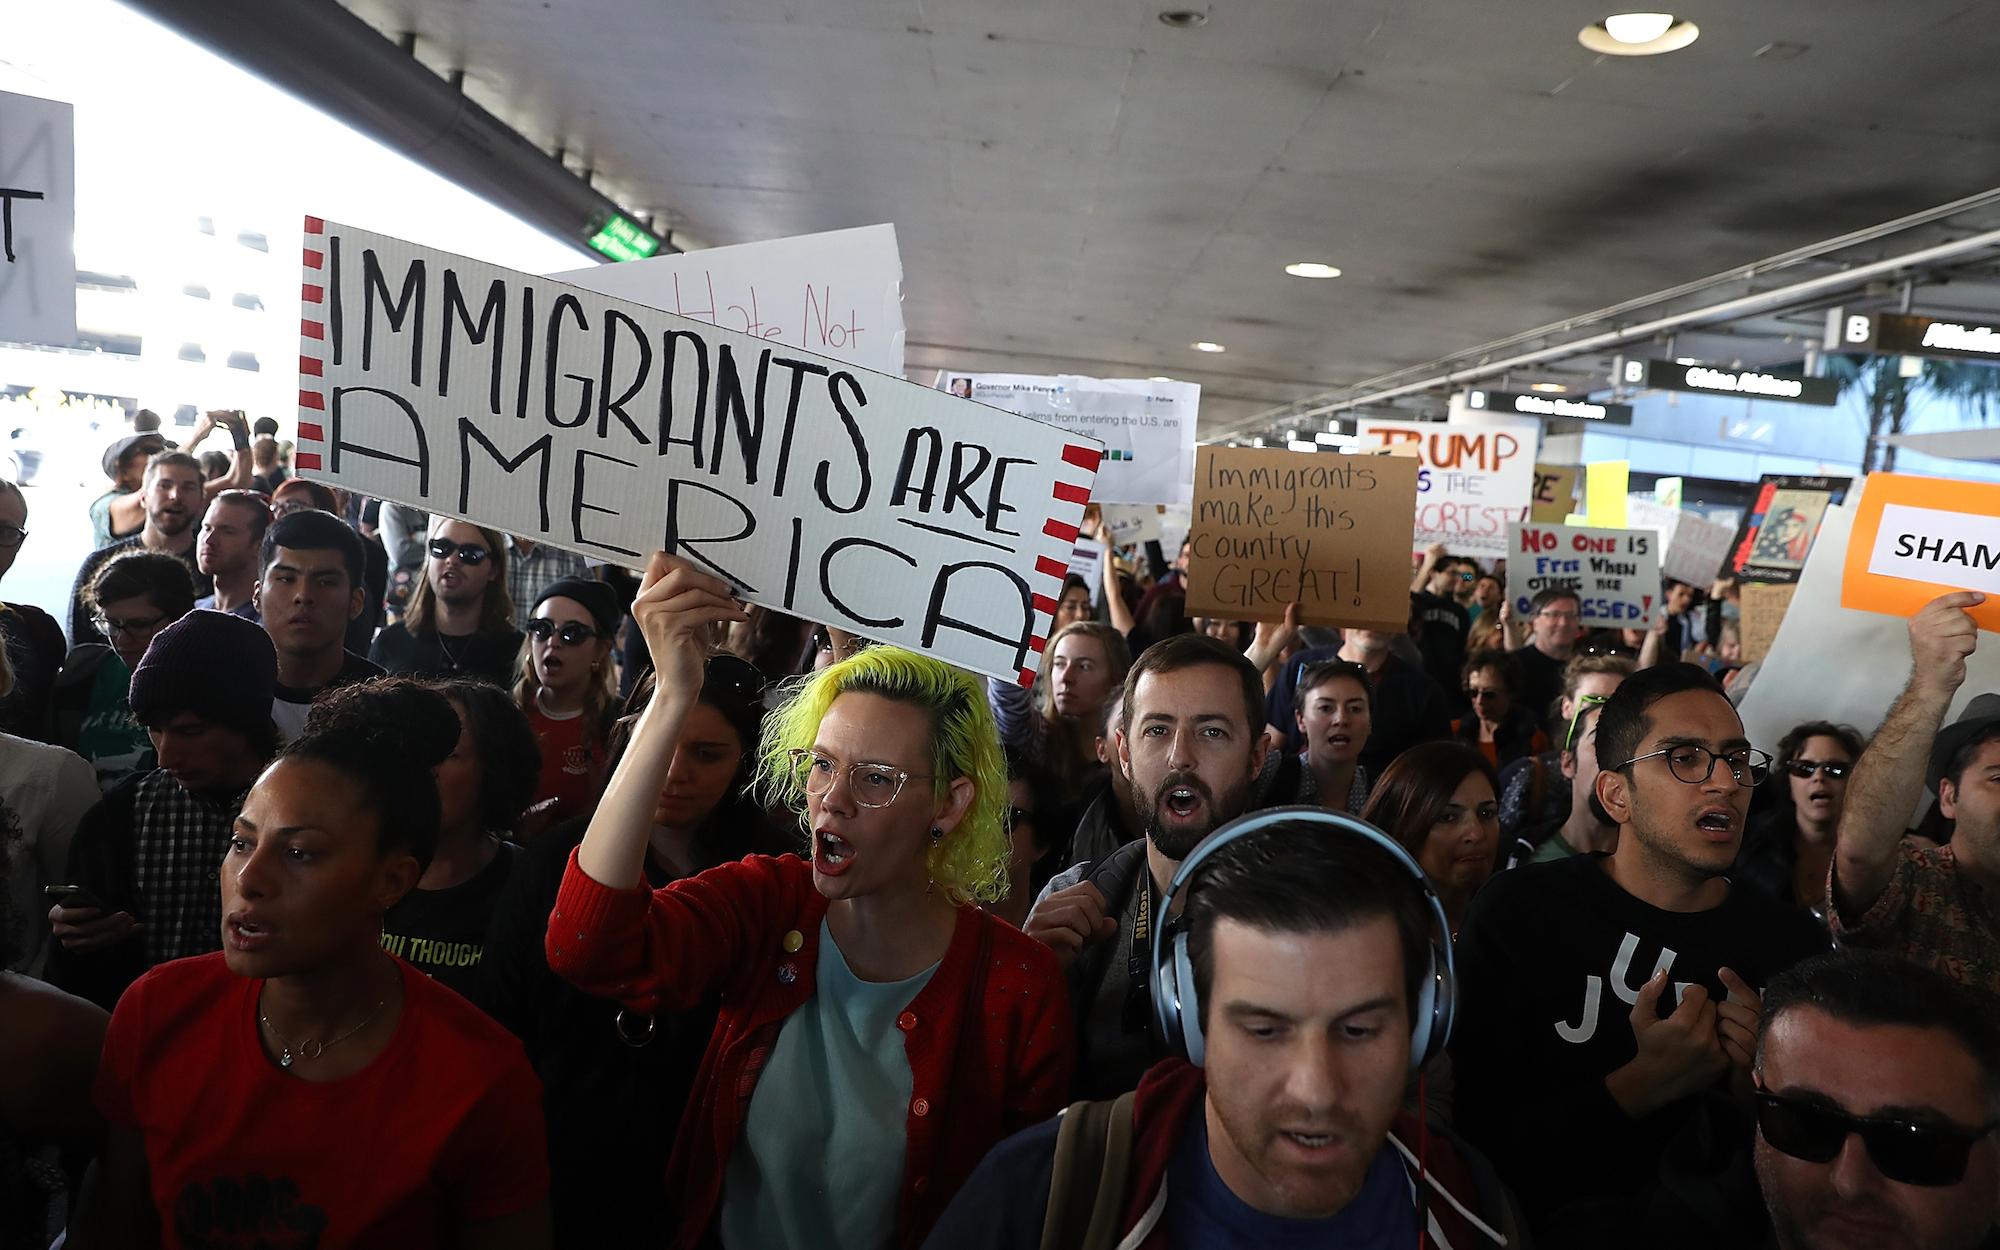 Trump's Muslim ban prompted massive protests around the US